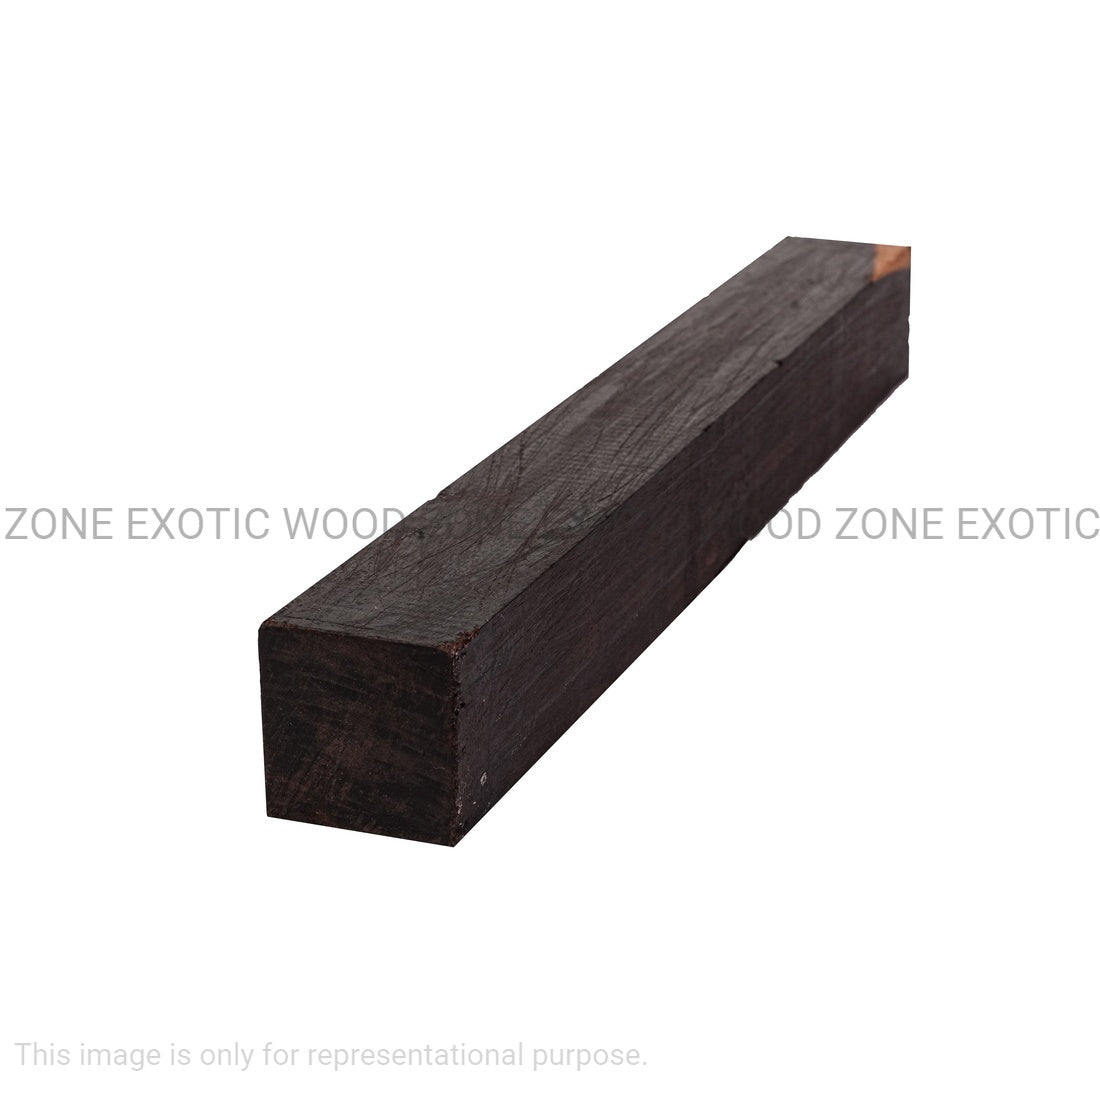 Pack of 2, Katalox Turning Wood Blanks 1-1/2&quot; x 1-1/2” x 18” - Exotic Wood Zone - Buy online Across USA 